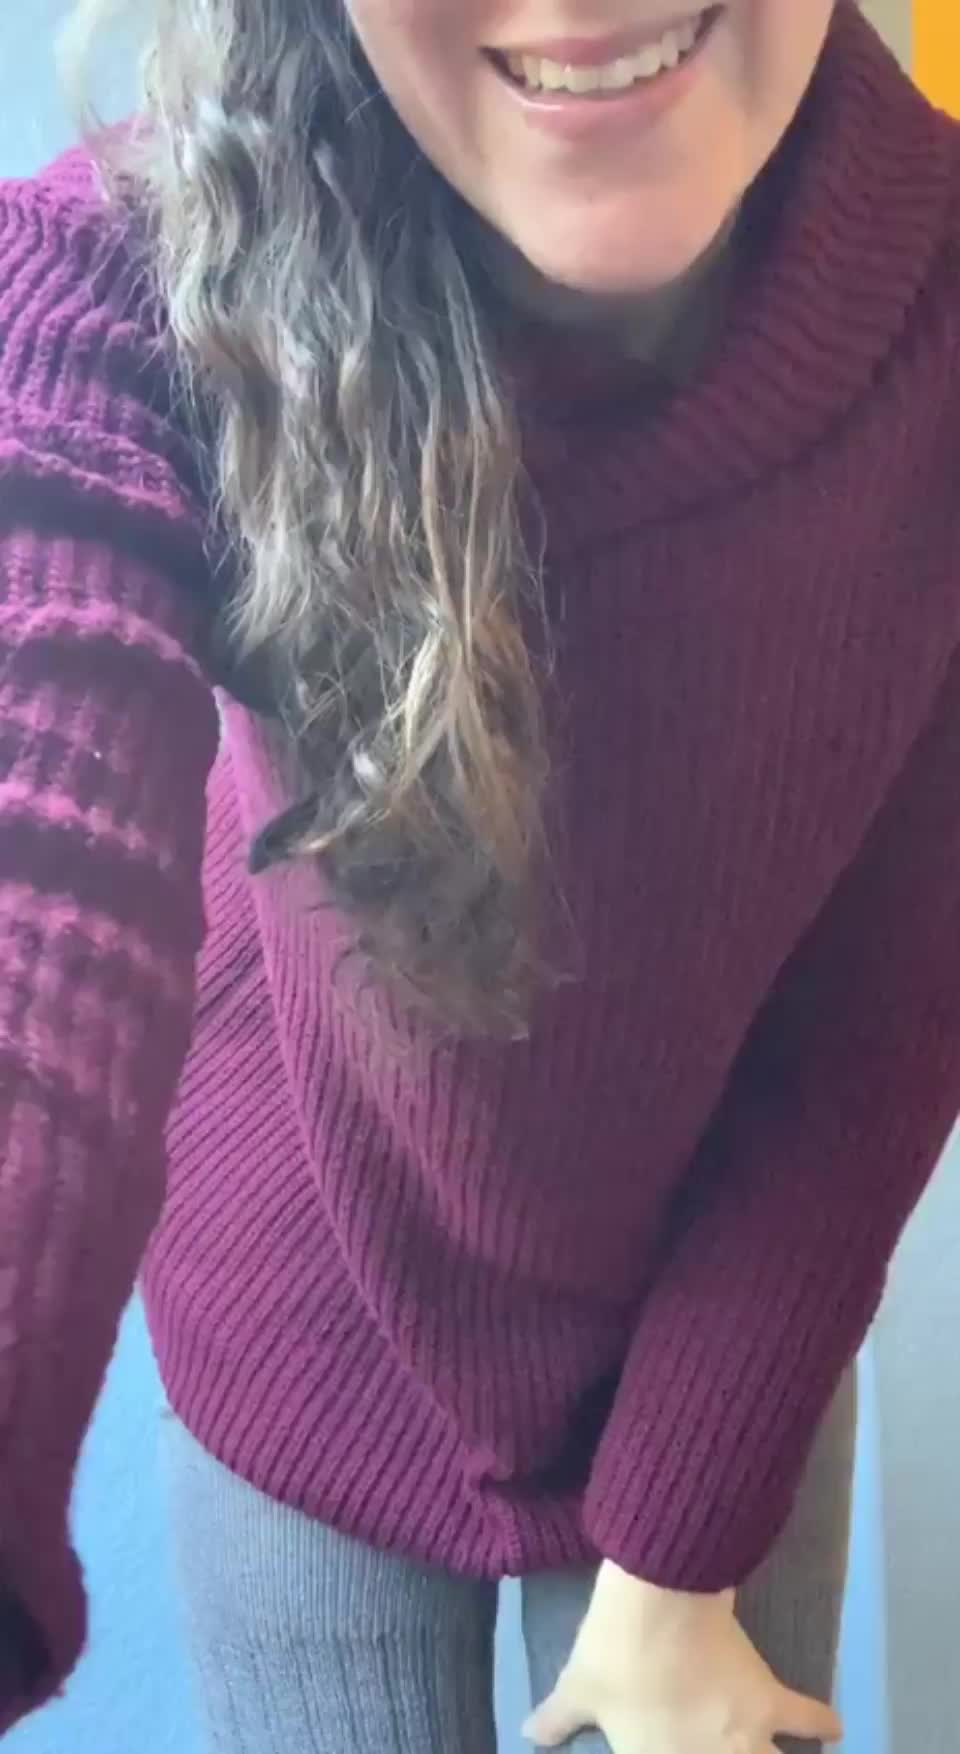 who's excited for sweater and thigh high season? : video clip